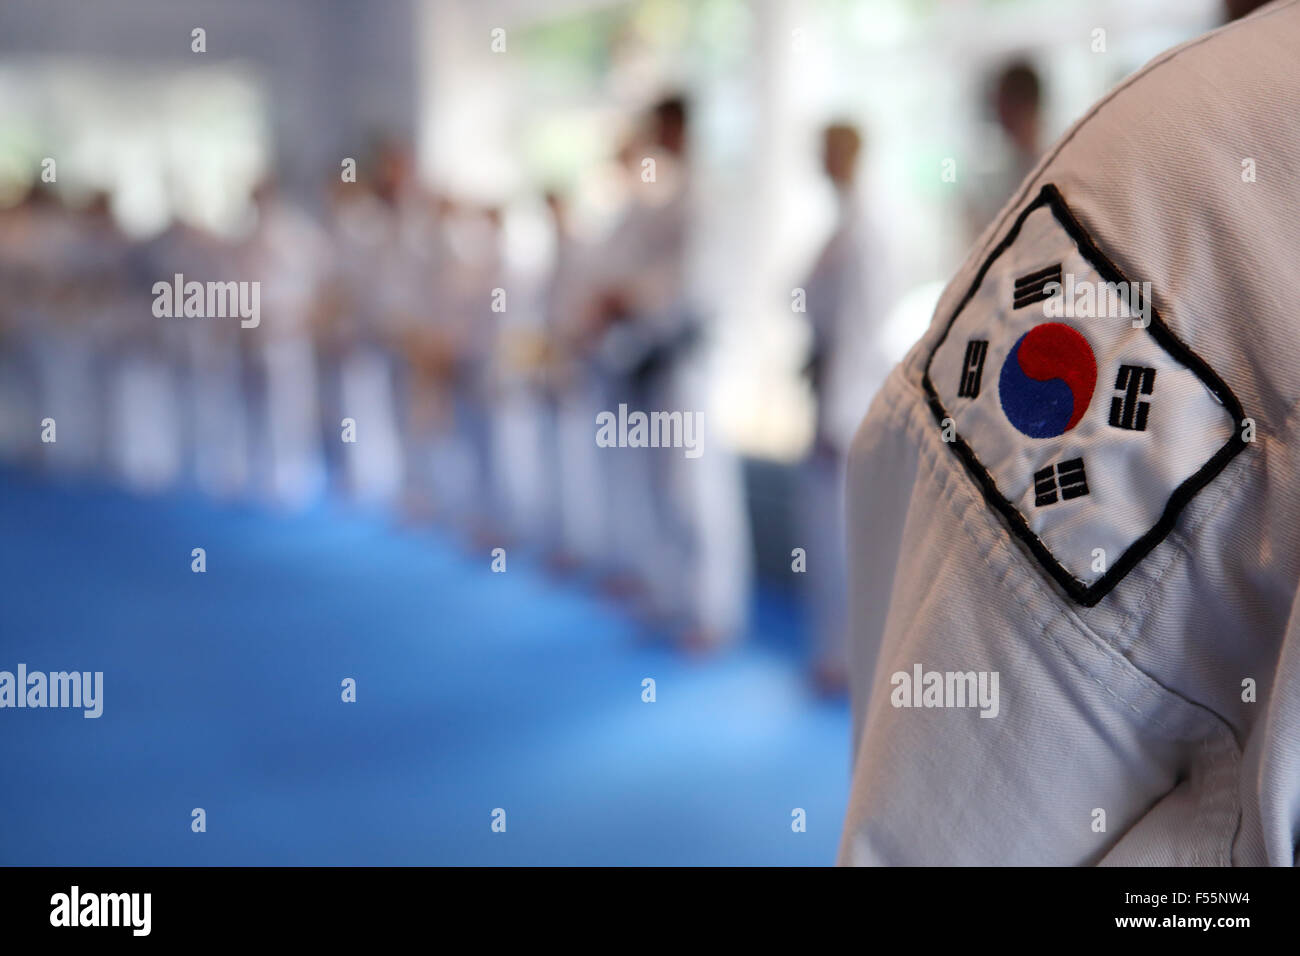 15.06.2013, Berlin, Berlin, Germany - National flag of South Korea on the sleeve of a taekwondo suit. 00S130615D107CAROEX.JPG - NOT for SALE in G E R M A N Y, A U S T R I A, S W I T Z E R L A N D [MODEL RELEASE: NOT APPLICABLE,, PROPERTY RELEASE: NO (c) caro photo agency / Sorge, http://www.caro-images.pl, info@carofoto.pl - In case of using the picture for non-journalistic purposes, please contact the agency - the picture is subject to royalty!] Stock Photo